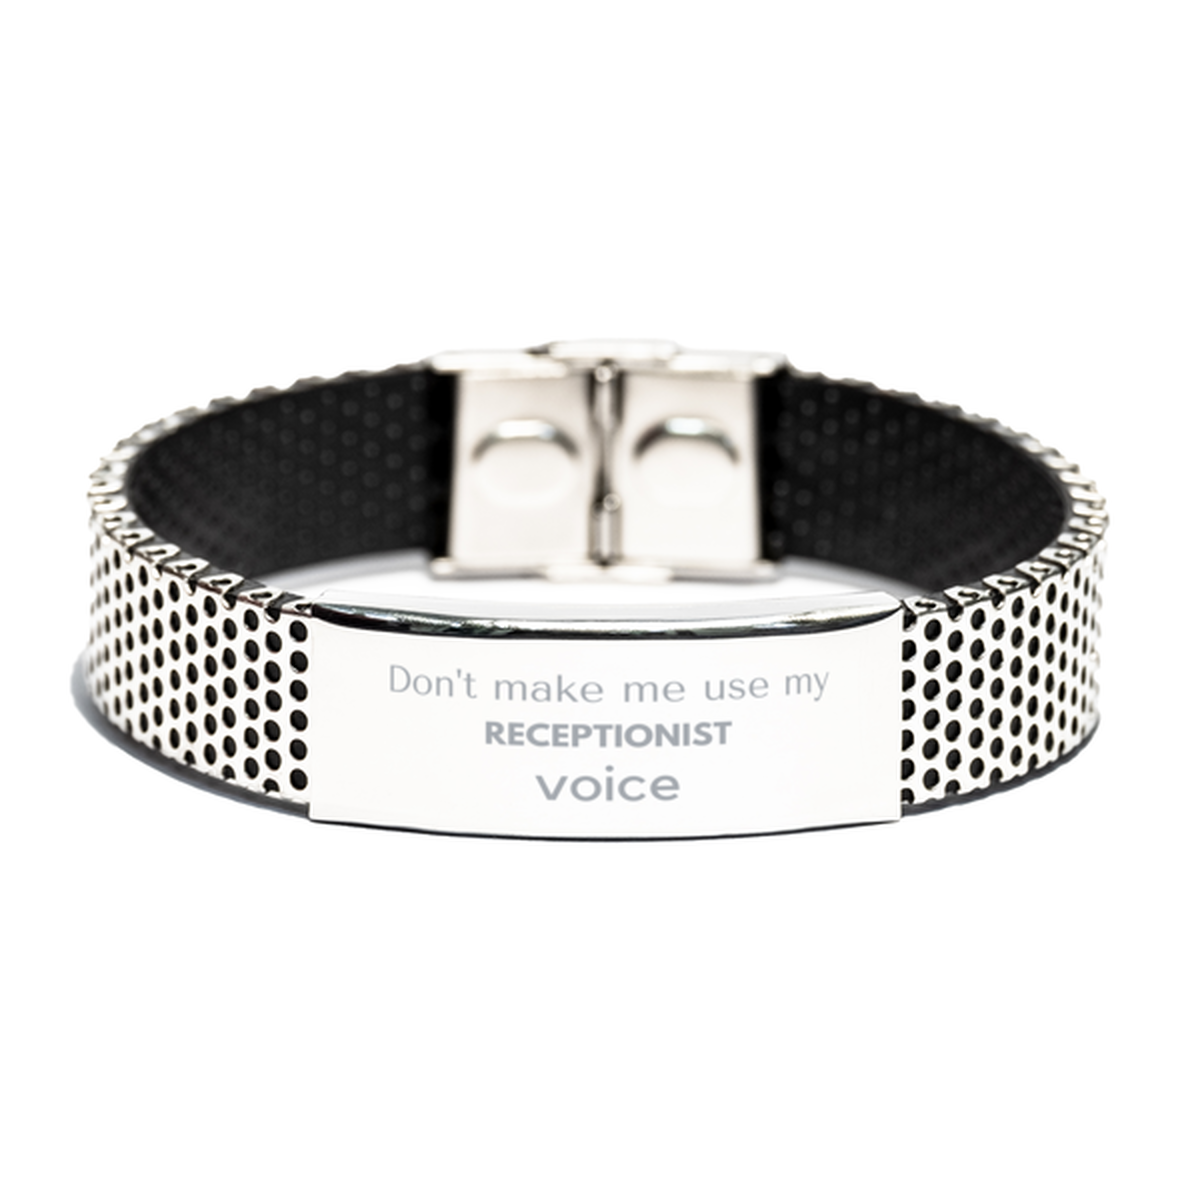 Don't make me use my Receptionist voice, Sarcasm Receptionist Gifts, Christmas Receptionist Stainless Steel Bracelet Birthday Unique Gifts For Receptionist Coworkers, Men, Women, Colleague, Friends